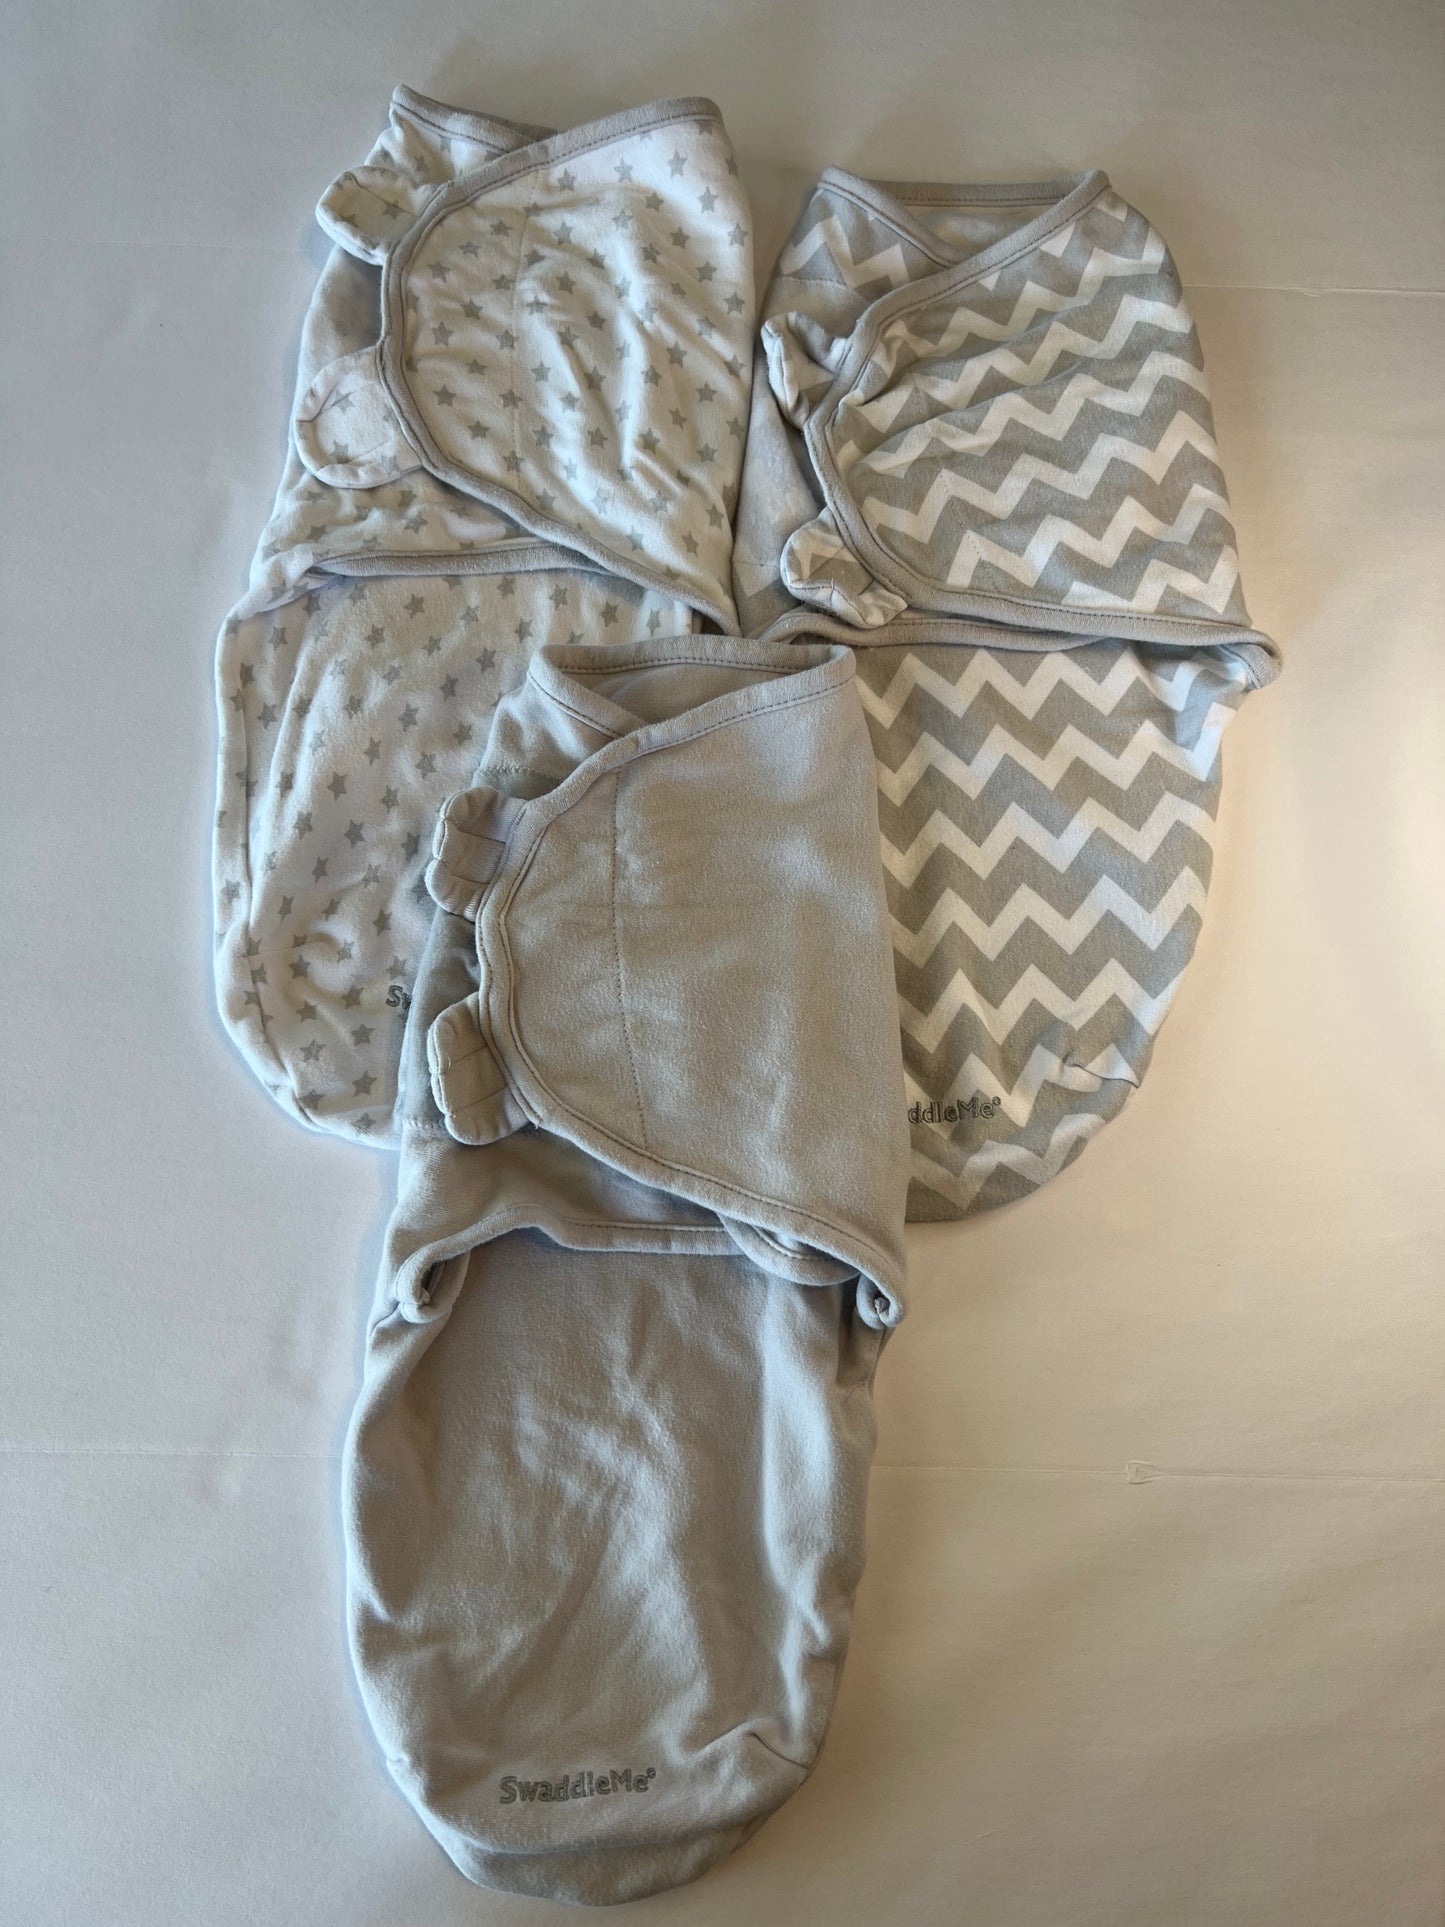 Swaddle me gender neutral size small 0-6 months set of 3